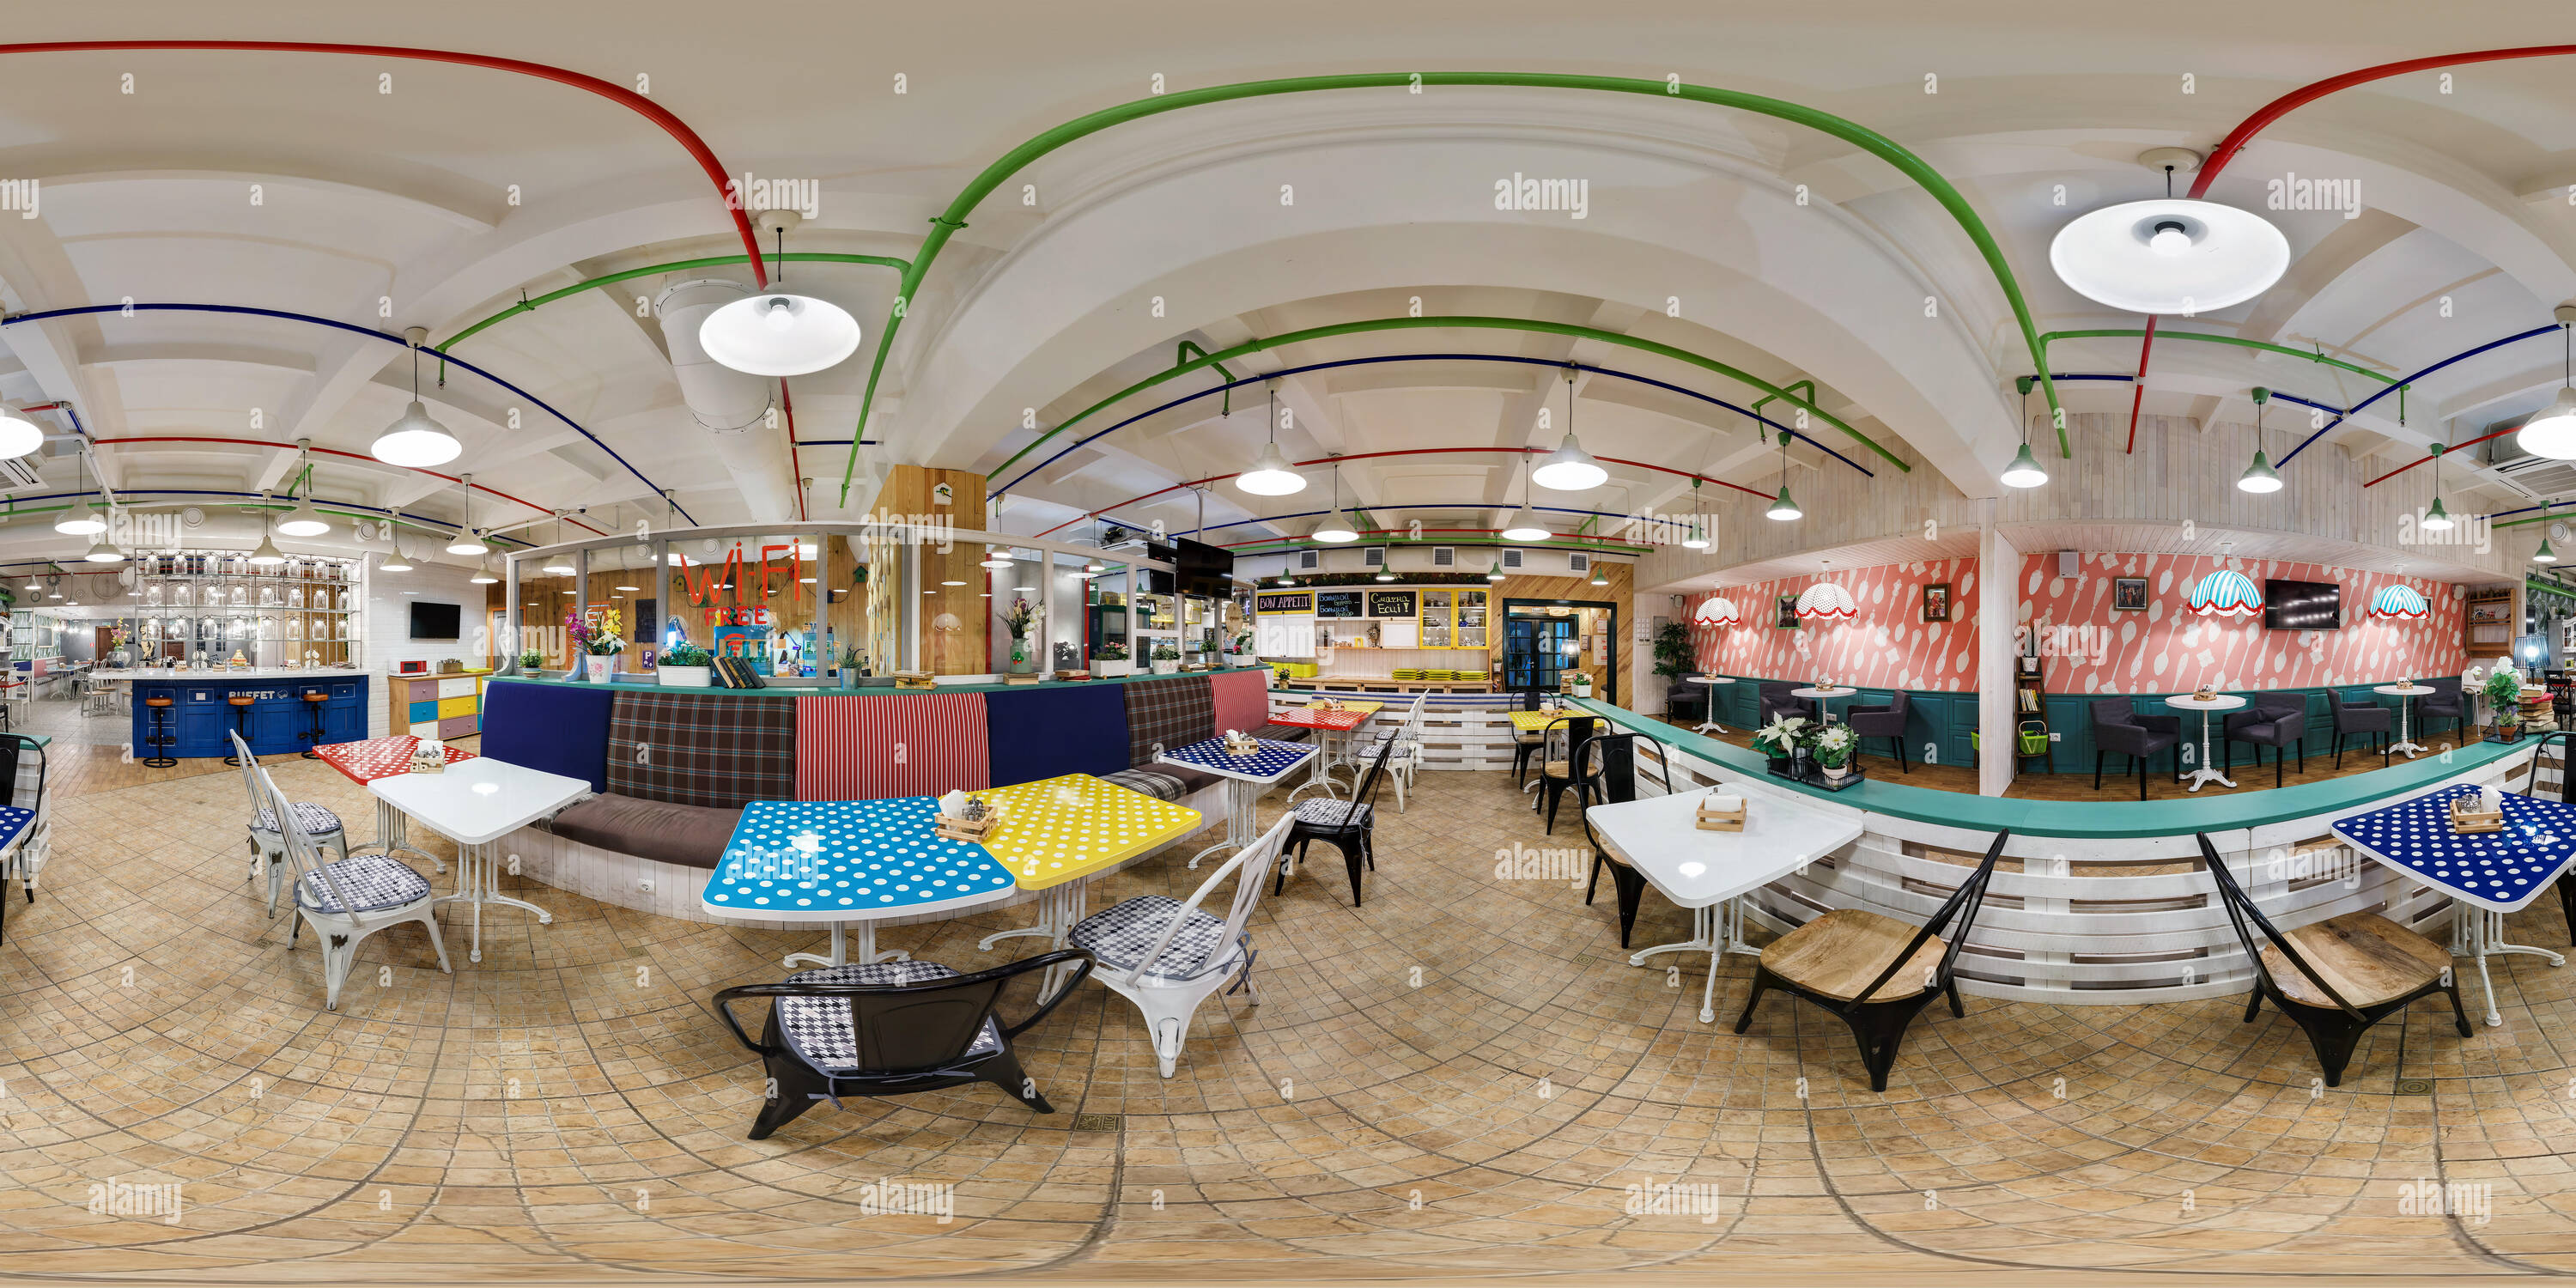 360 degree panoramic view of GRODNO, BELARUS - JANUARY 26, 2016: Panorama in interior stylish modern fast food cafe. Full spherical 360 by 180 degrees seamless panorama in equirec